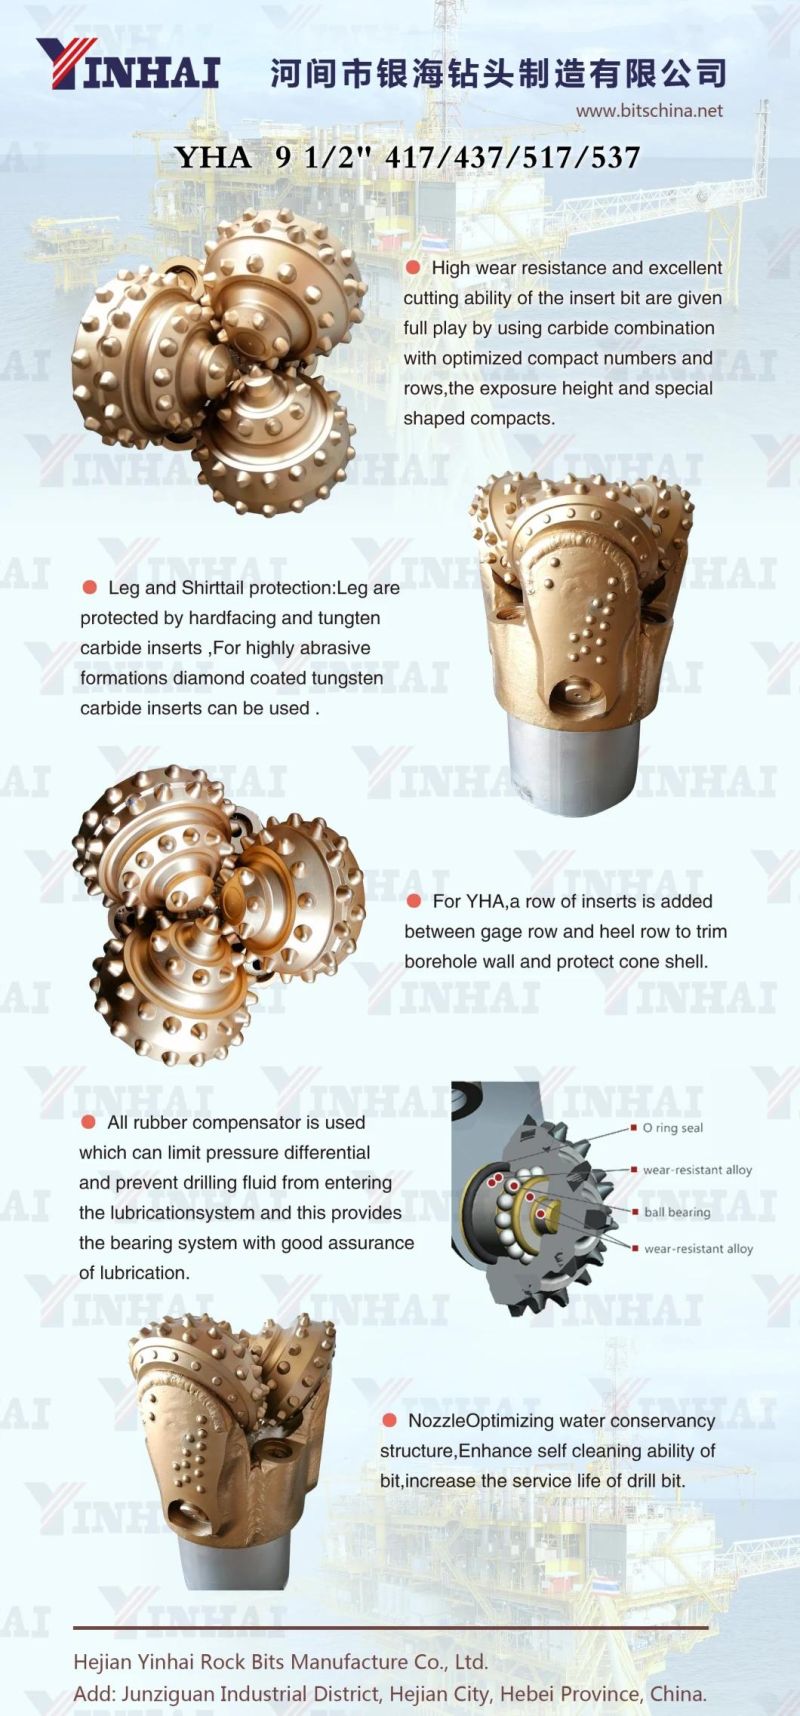 Tricone Bit 9 1/2" IADC417/517 Roller Cone Bit/Rock Drill Bit for Soft Formation Drilling